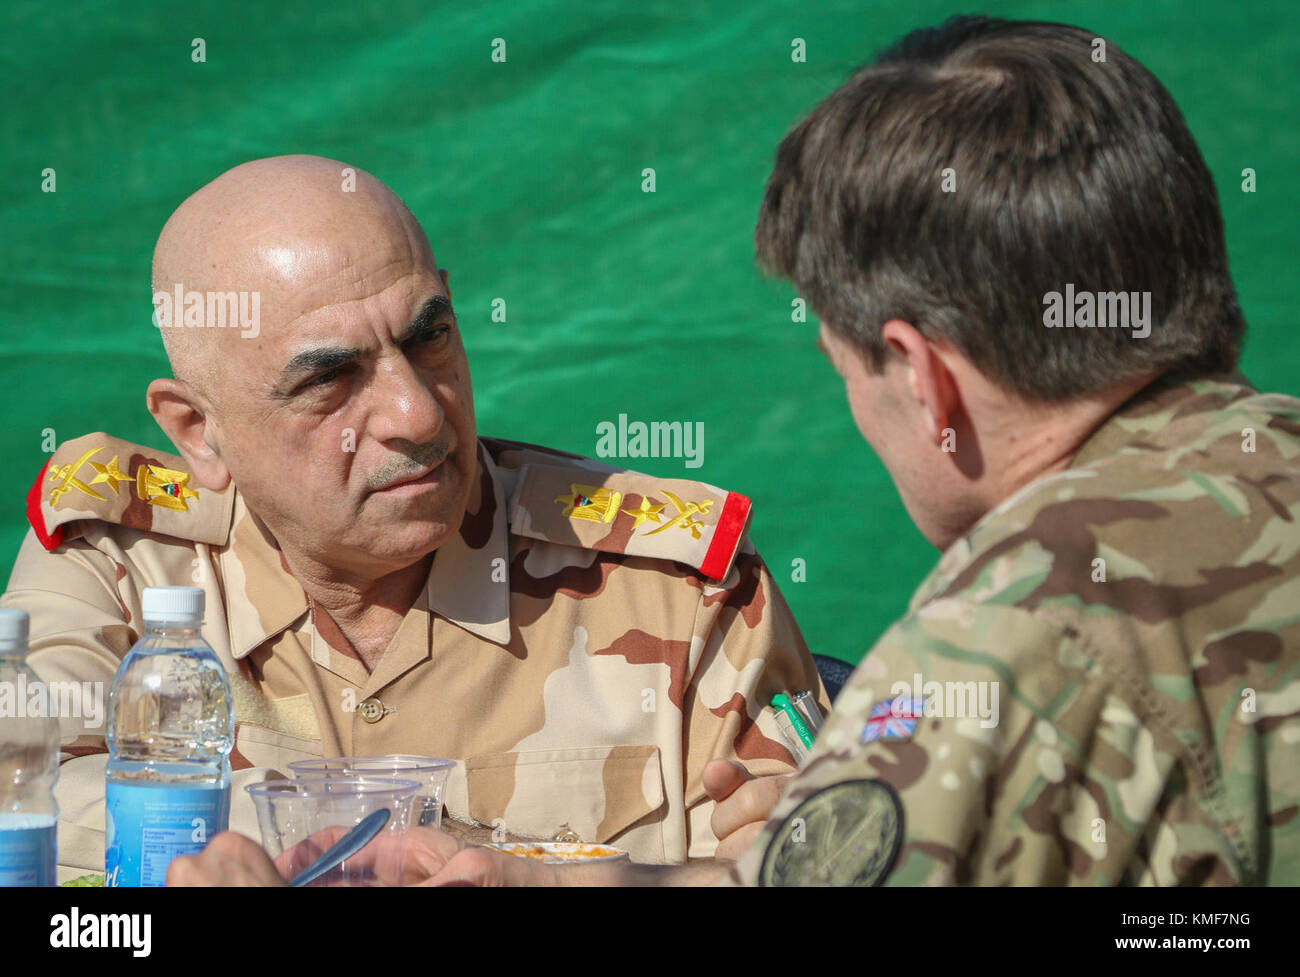 Iraqi security force Staff Lt. Gen. Wa’ad Zainl Saleh, senior secretary to the Iraqi chief of defense, speaks with British Army Maj. Gen. Felix Gedney, deputy commanding general for strategy and support with Combined Joint Task Force – Operation Inherent Resolve, during a High Level Committee lunch in Baghdad, Iraq, Dec. 5, 2017. The committee discussed the way forward for the Coalition’s continued support of the Iraqi security forces. CJTF-OIR is the global Coalition to defeat ISIS in Iraq and Syria. Stock Photo